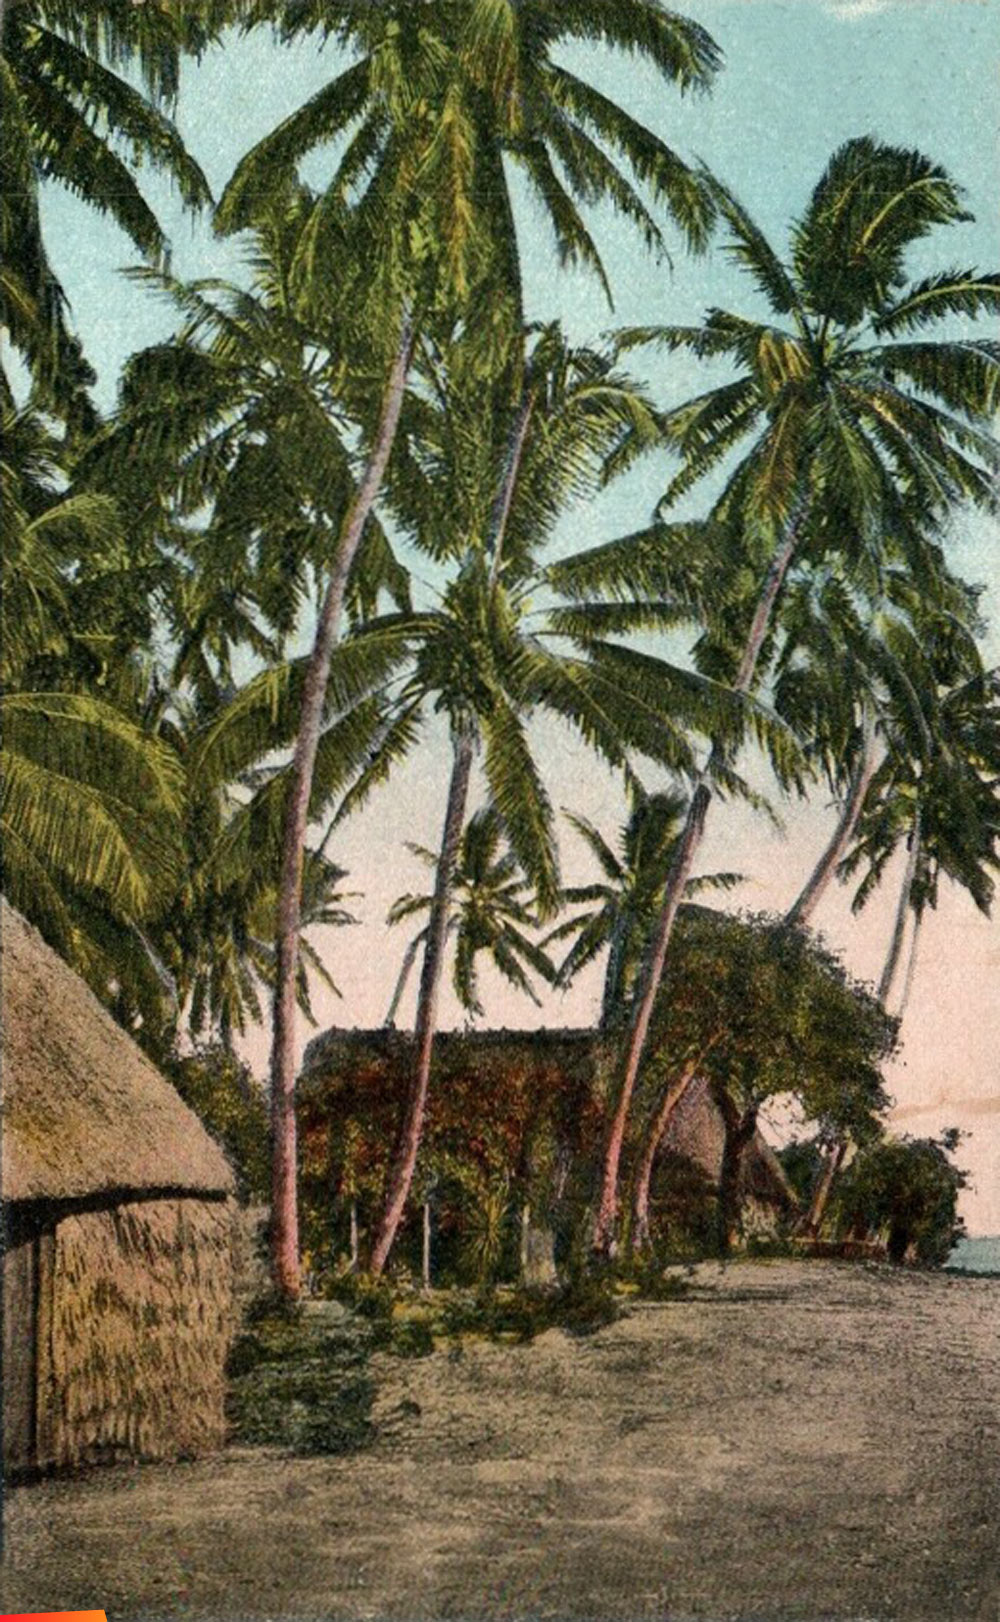 Thatch homes on the beach, San Pedro about 1920